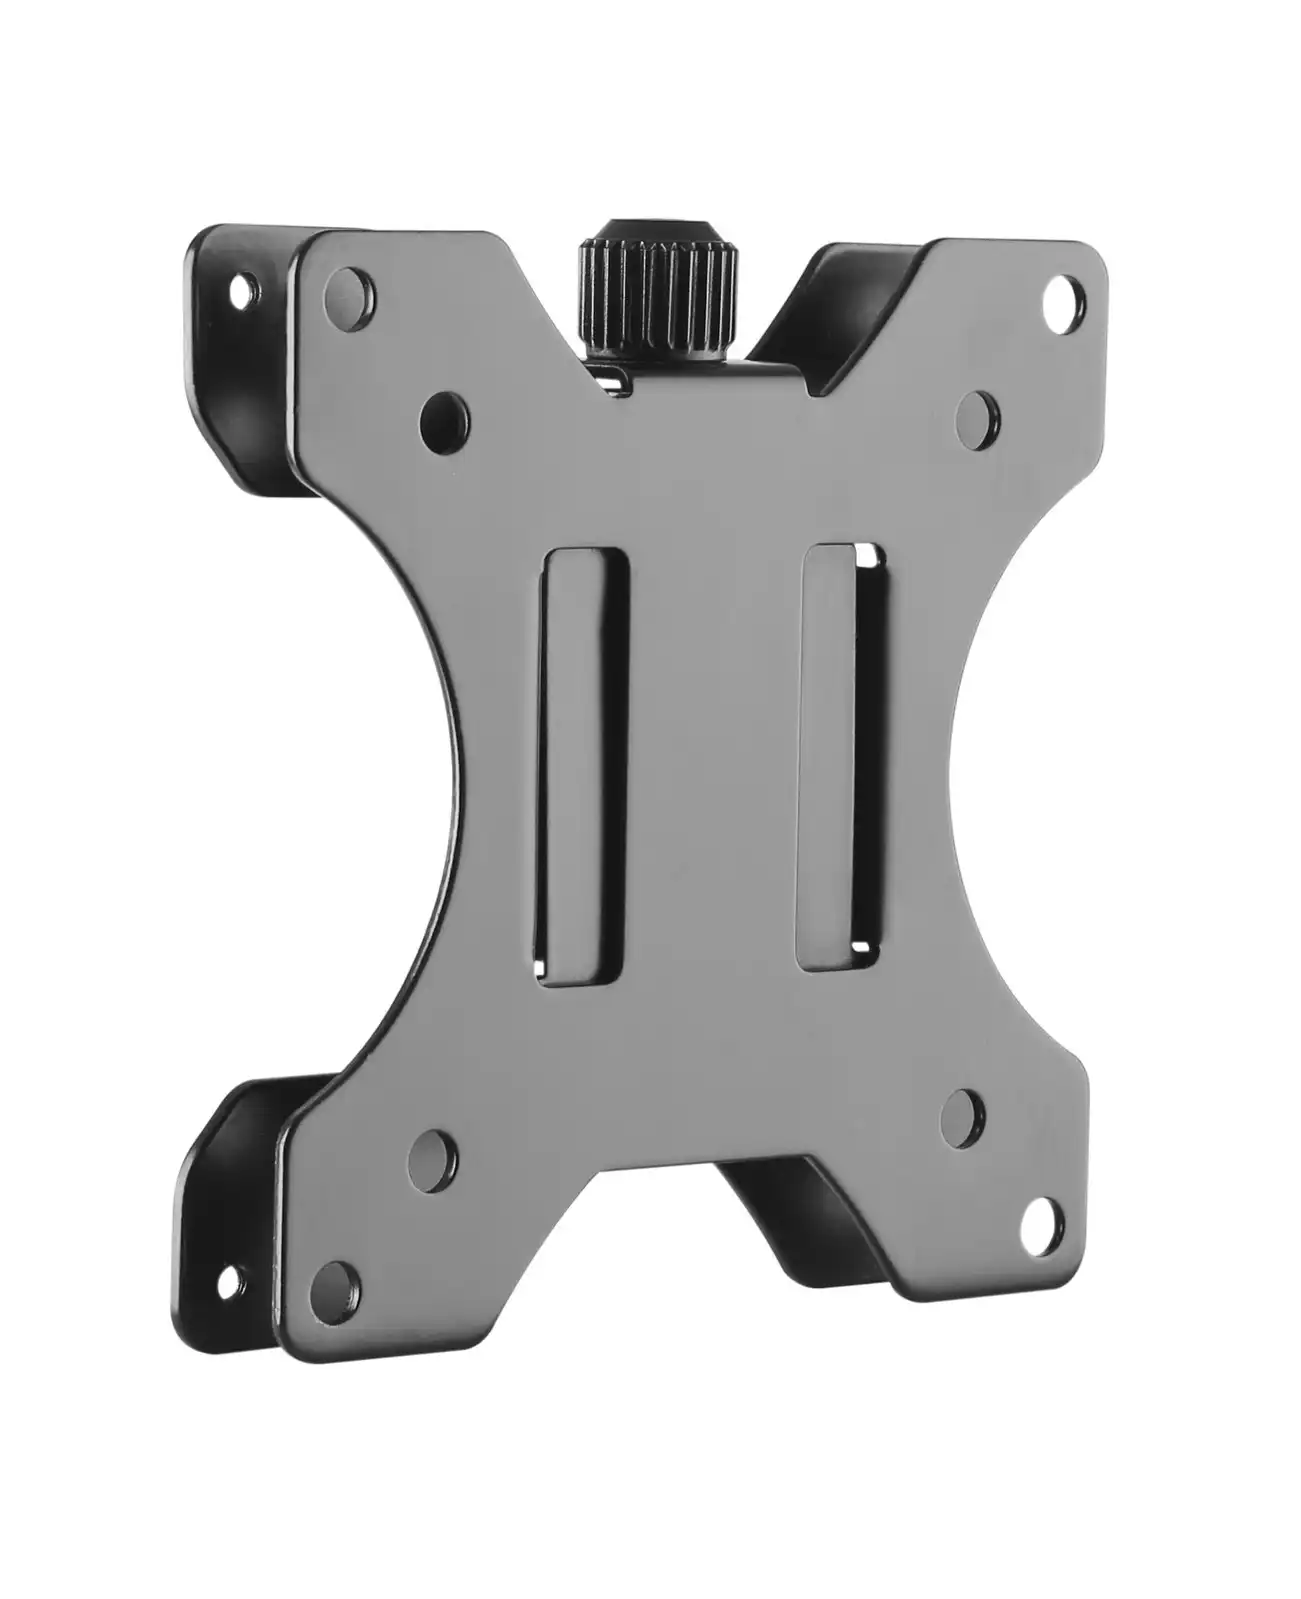 Brateck Quick Release Vesa Adapter Mount for 75x75/100x100 Mounting Holes Black